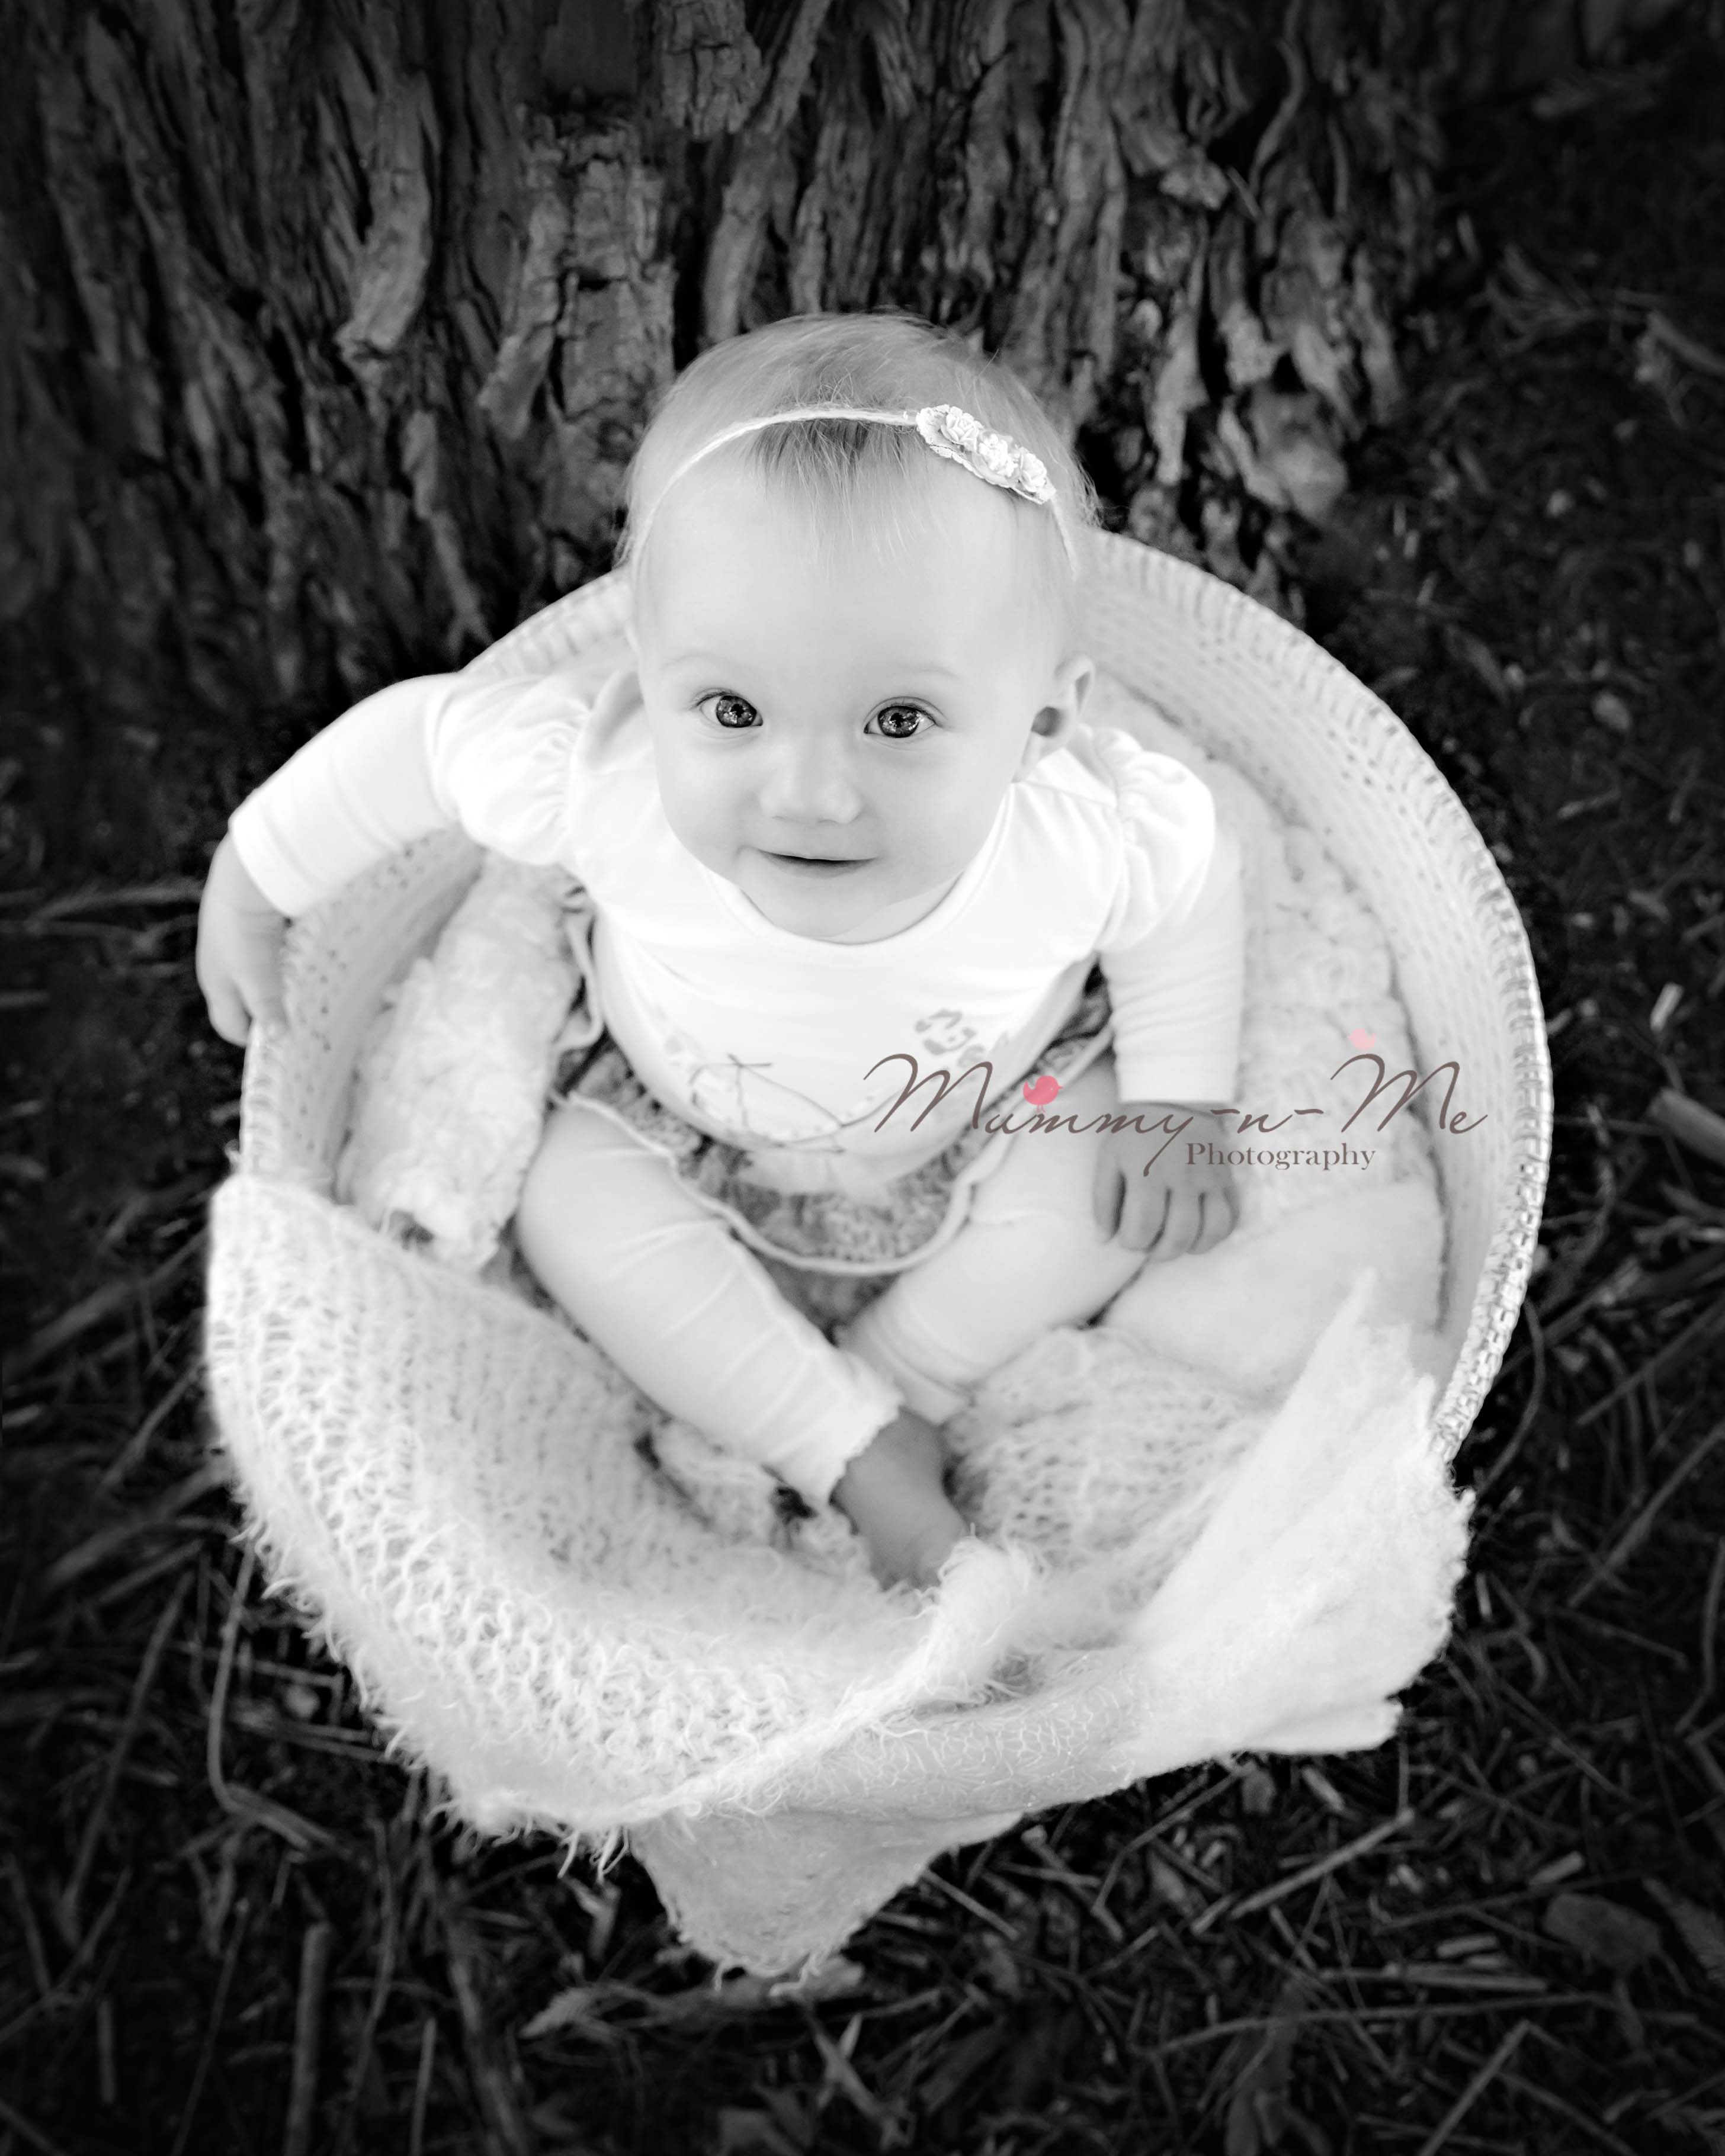 9mth girl in basket in the park Brisbane Family Child Baby Photographer